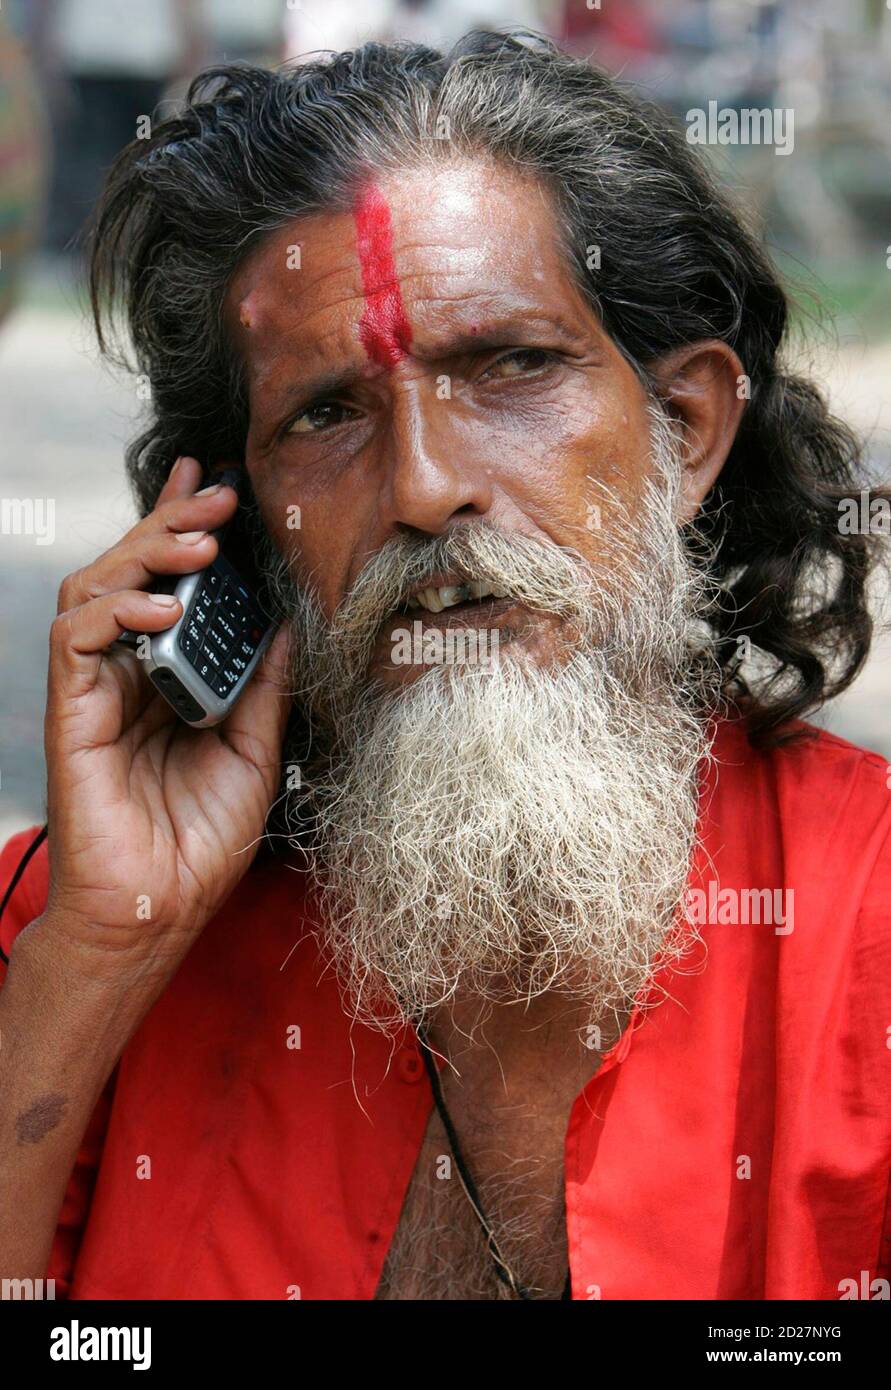 A Hindu holy man speaks on a mobile phone in the northeastern Indian city  of Siliguri August 24, 2007. Nokia, the world's top cellphone maker said on  Thursday India overtook the United